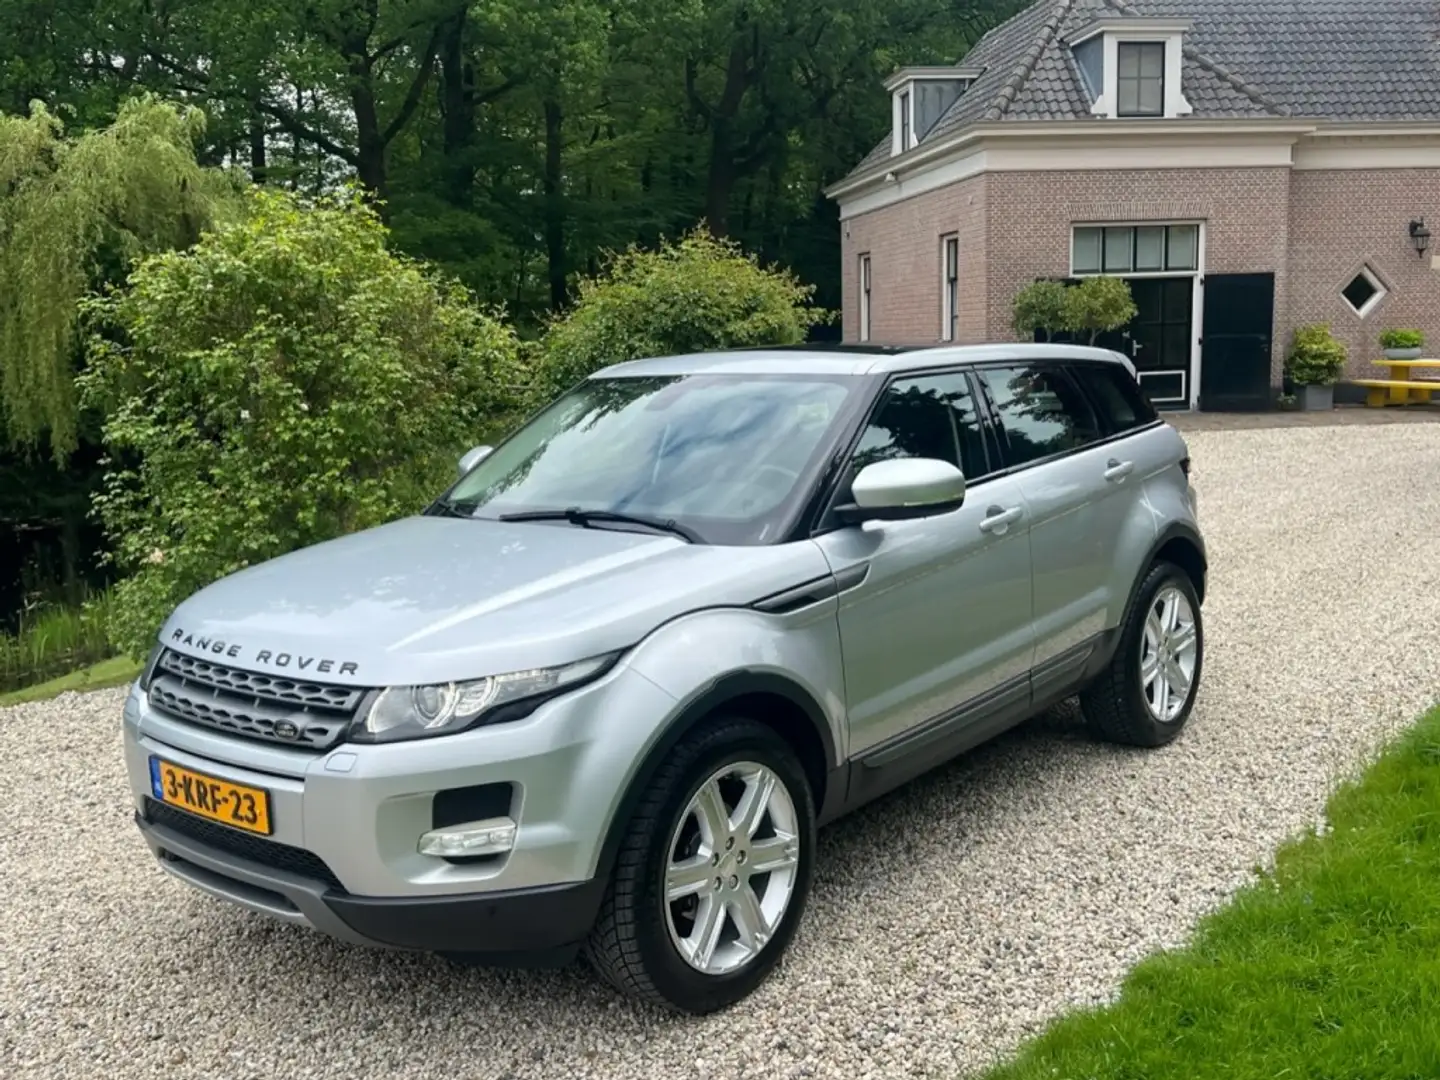 Land Rover Range Rover 2.0 SI 4WD DYNAMIC Automaat 5drs 2e eig. #PANORAMA siva - 1